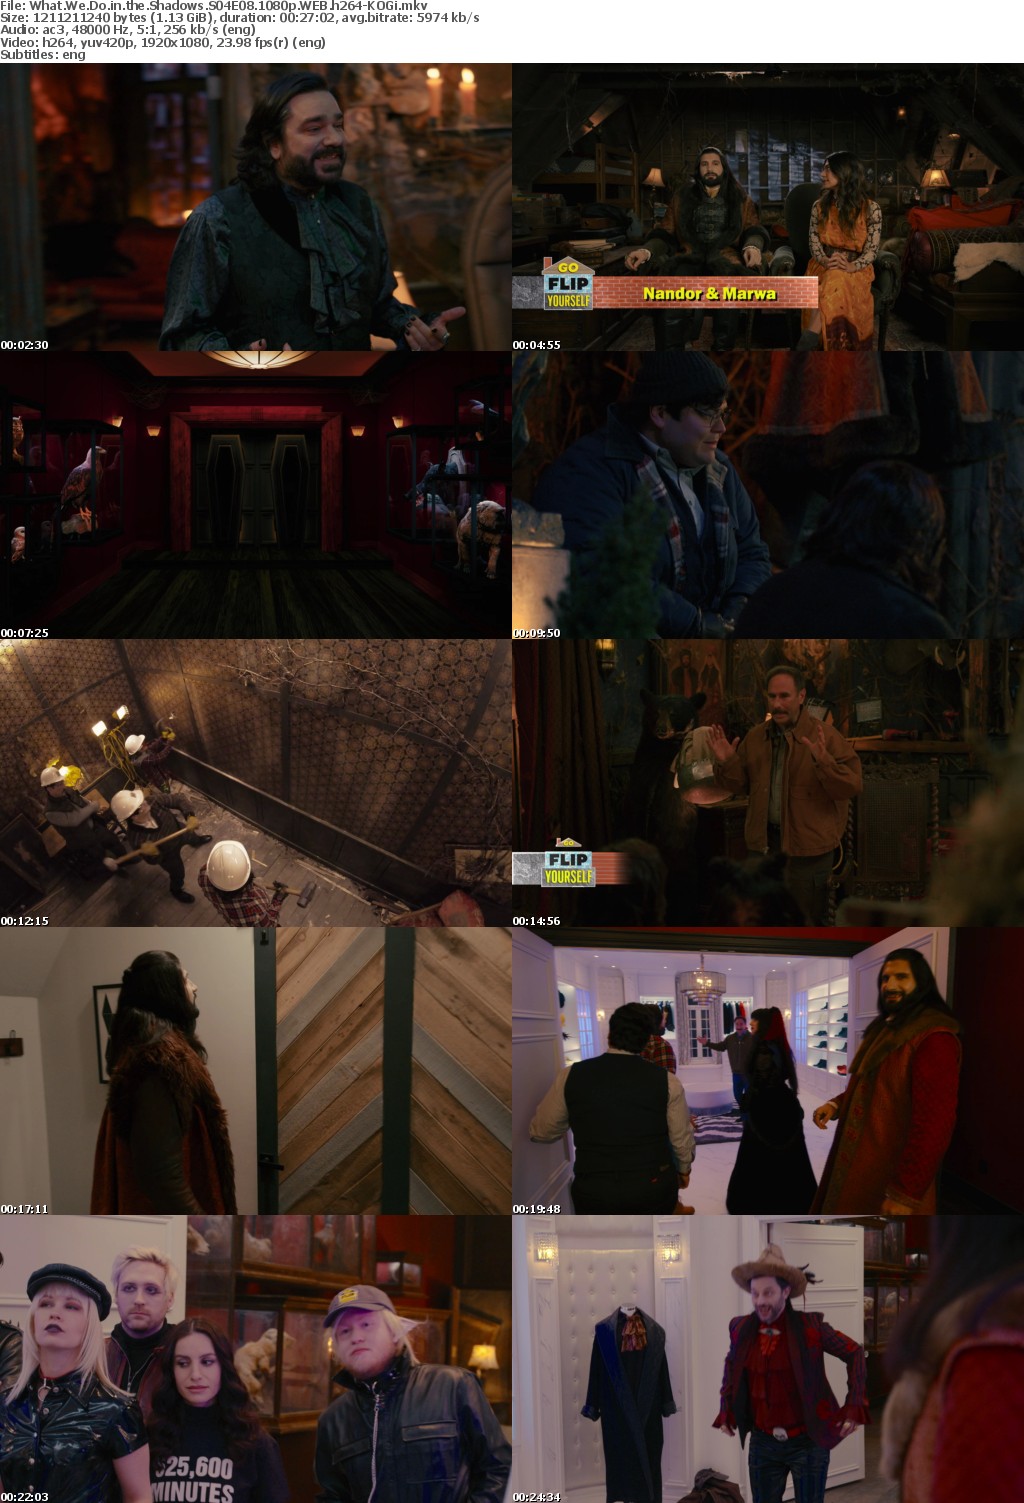 What We Do in the Shadows S04E08 1080p WEB h264-KOGi